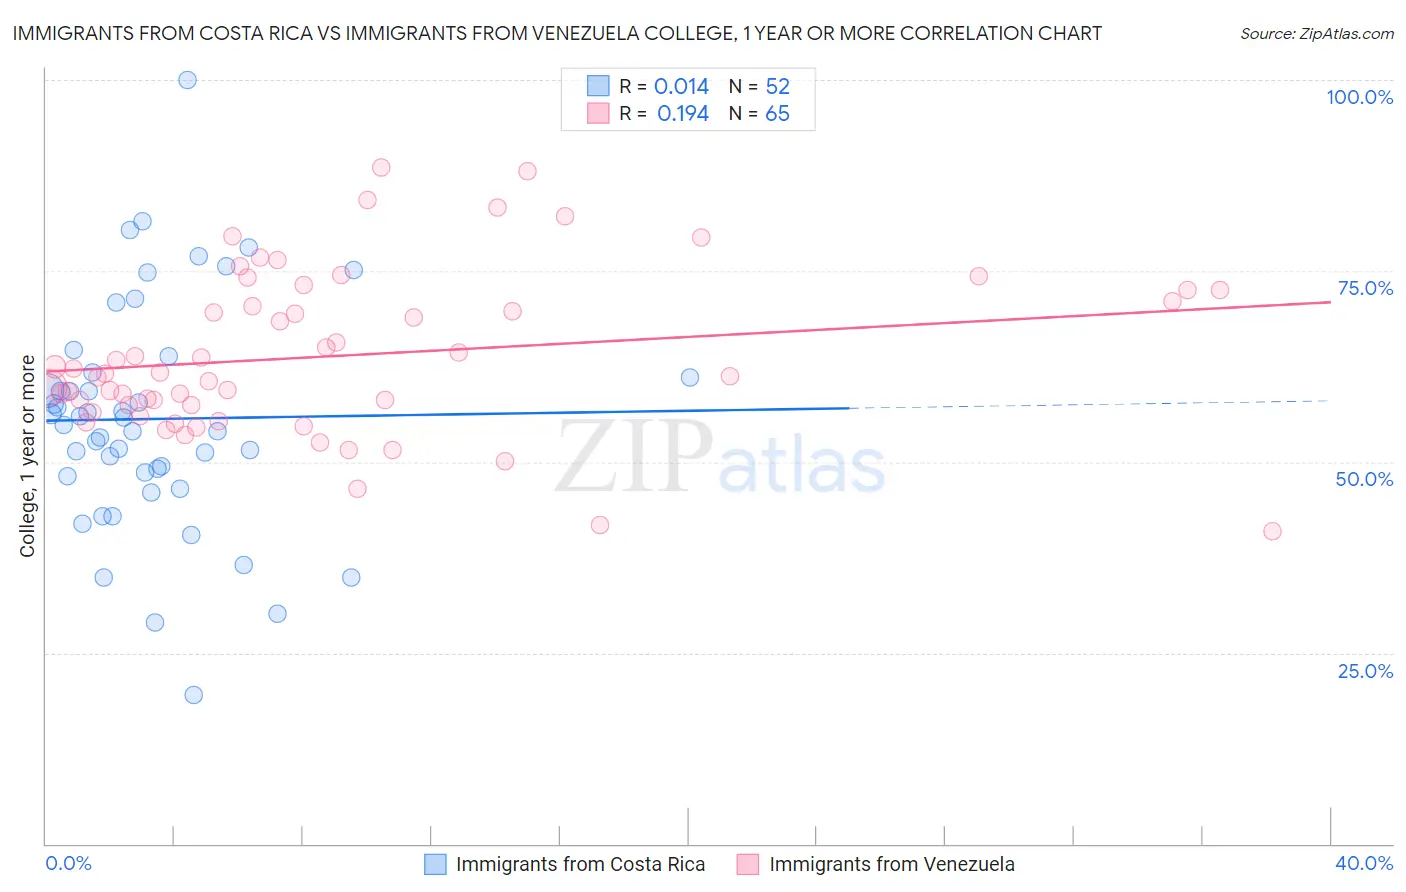 Immigrants from Costa Rica vs Immigrants from Venezuela College, 1 year or more